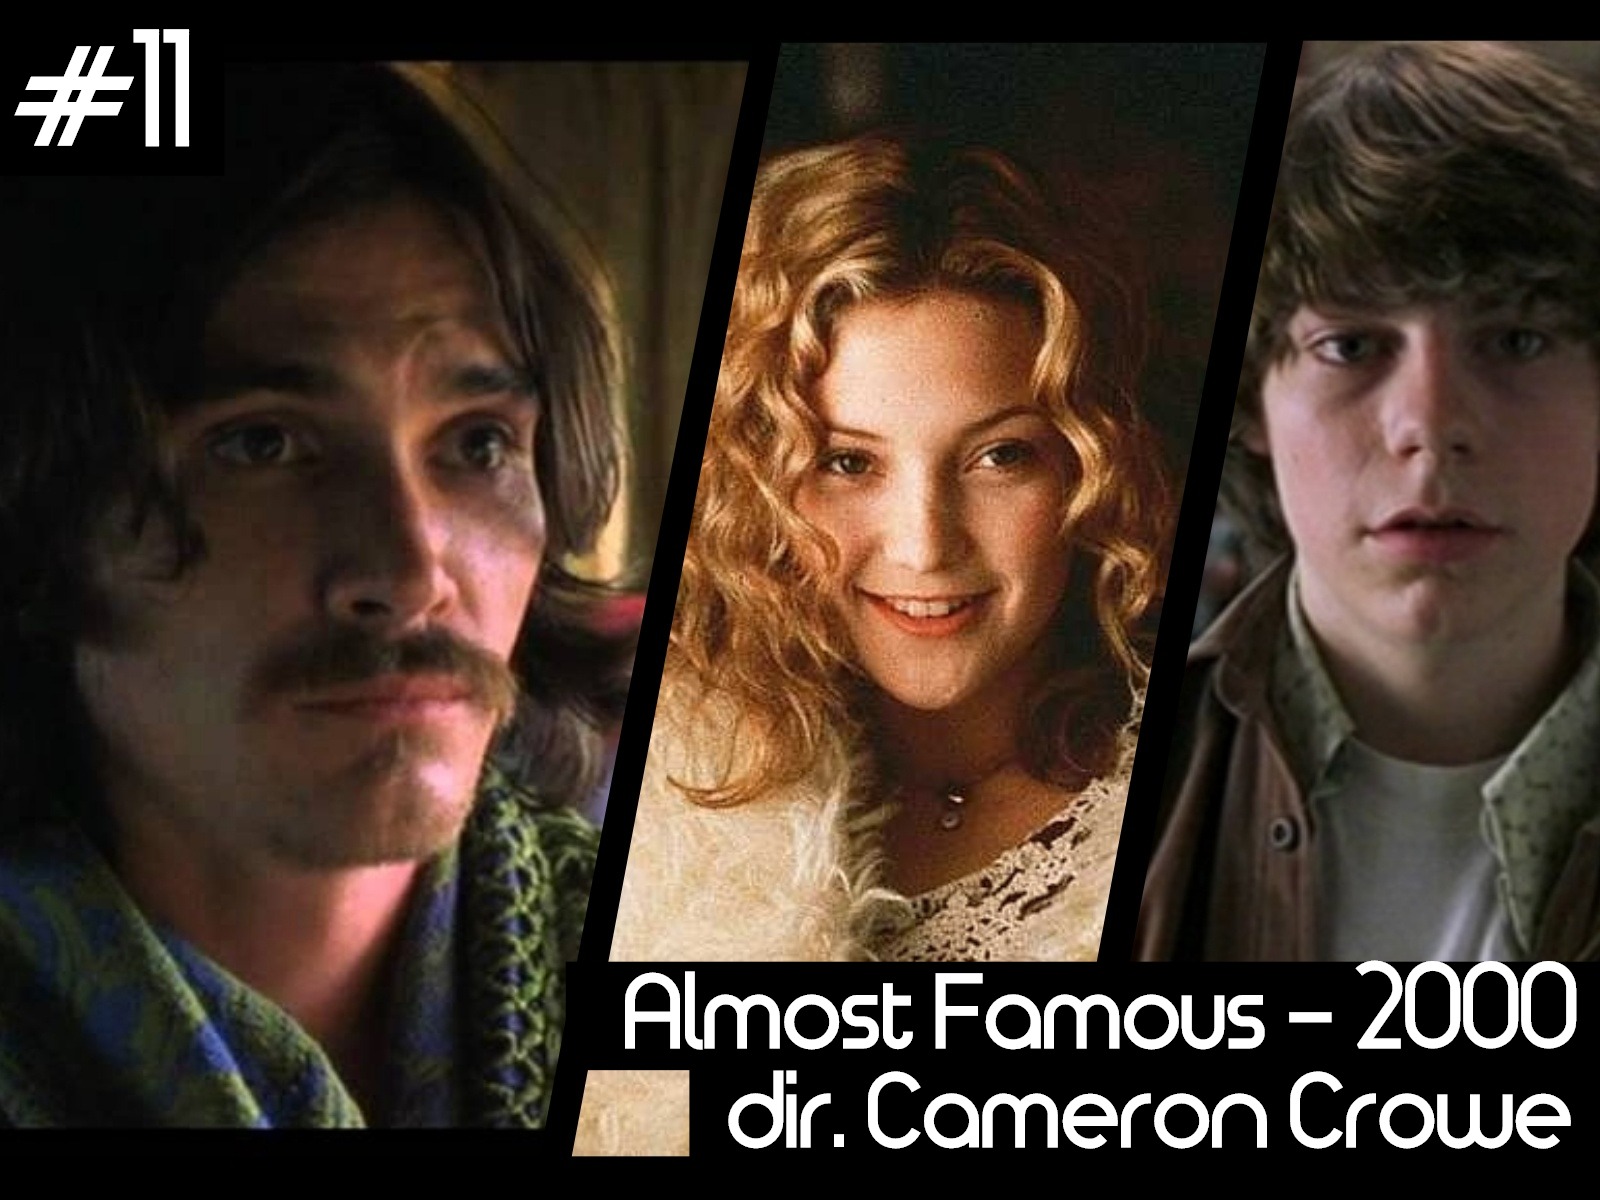 11 - almost famous.jpg